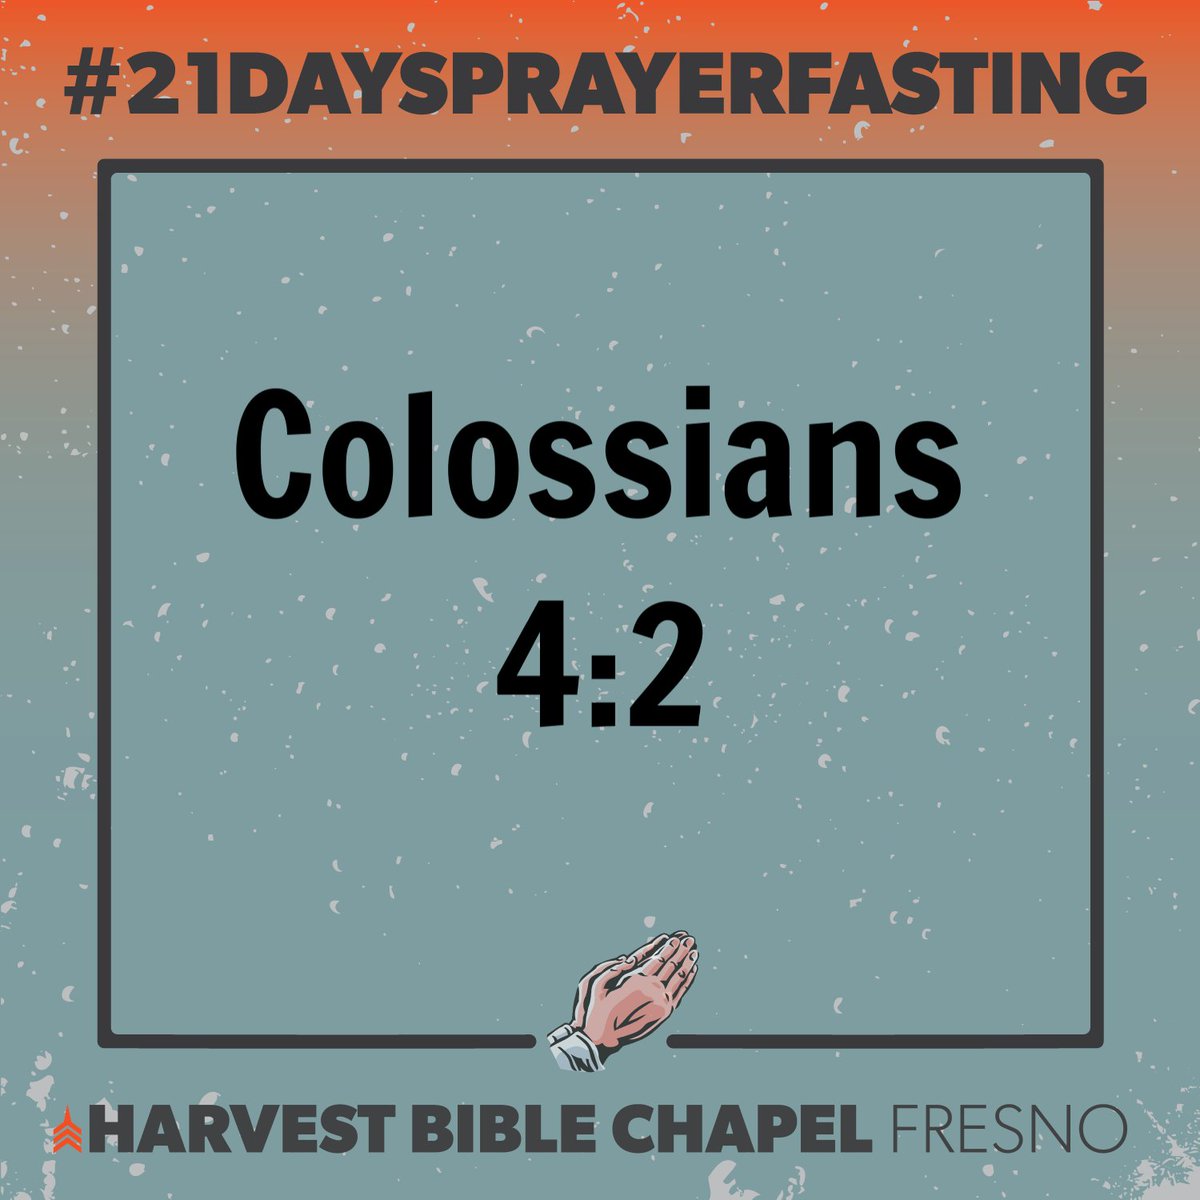 Today let's be obedient in prayer to Colossians 4:2. #21DaysPrayerFasting #Payer #Fasting #Fresno